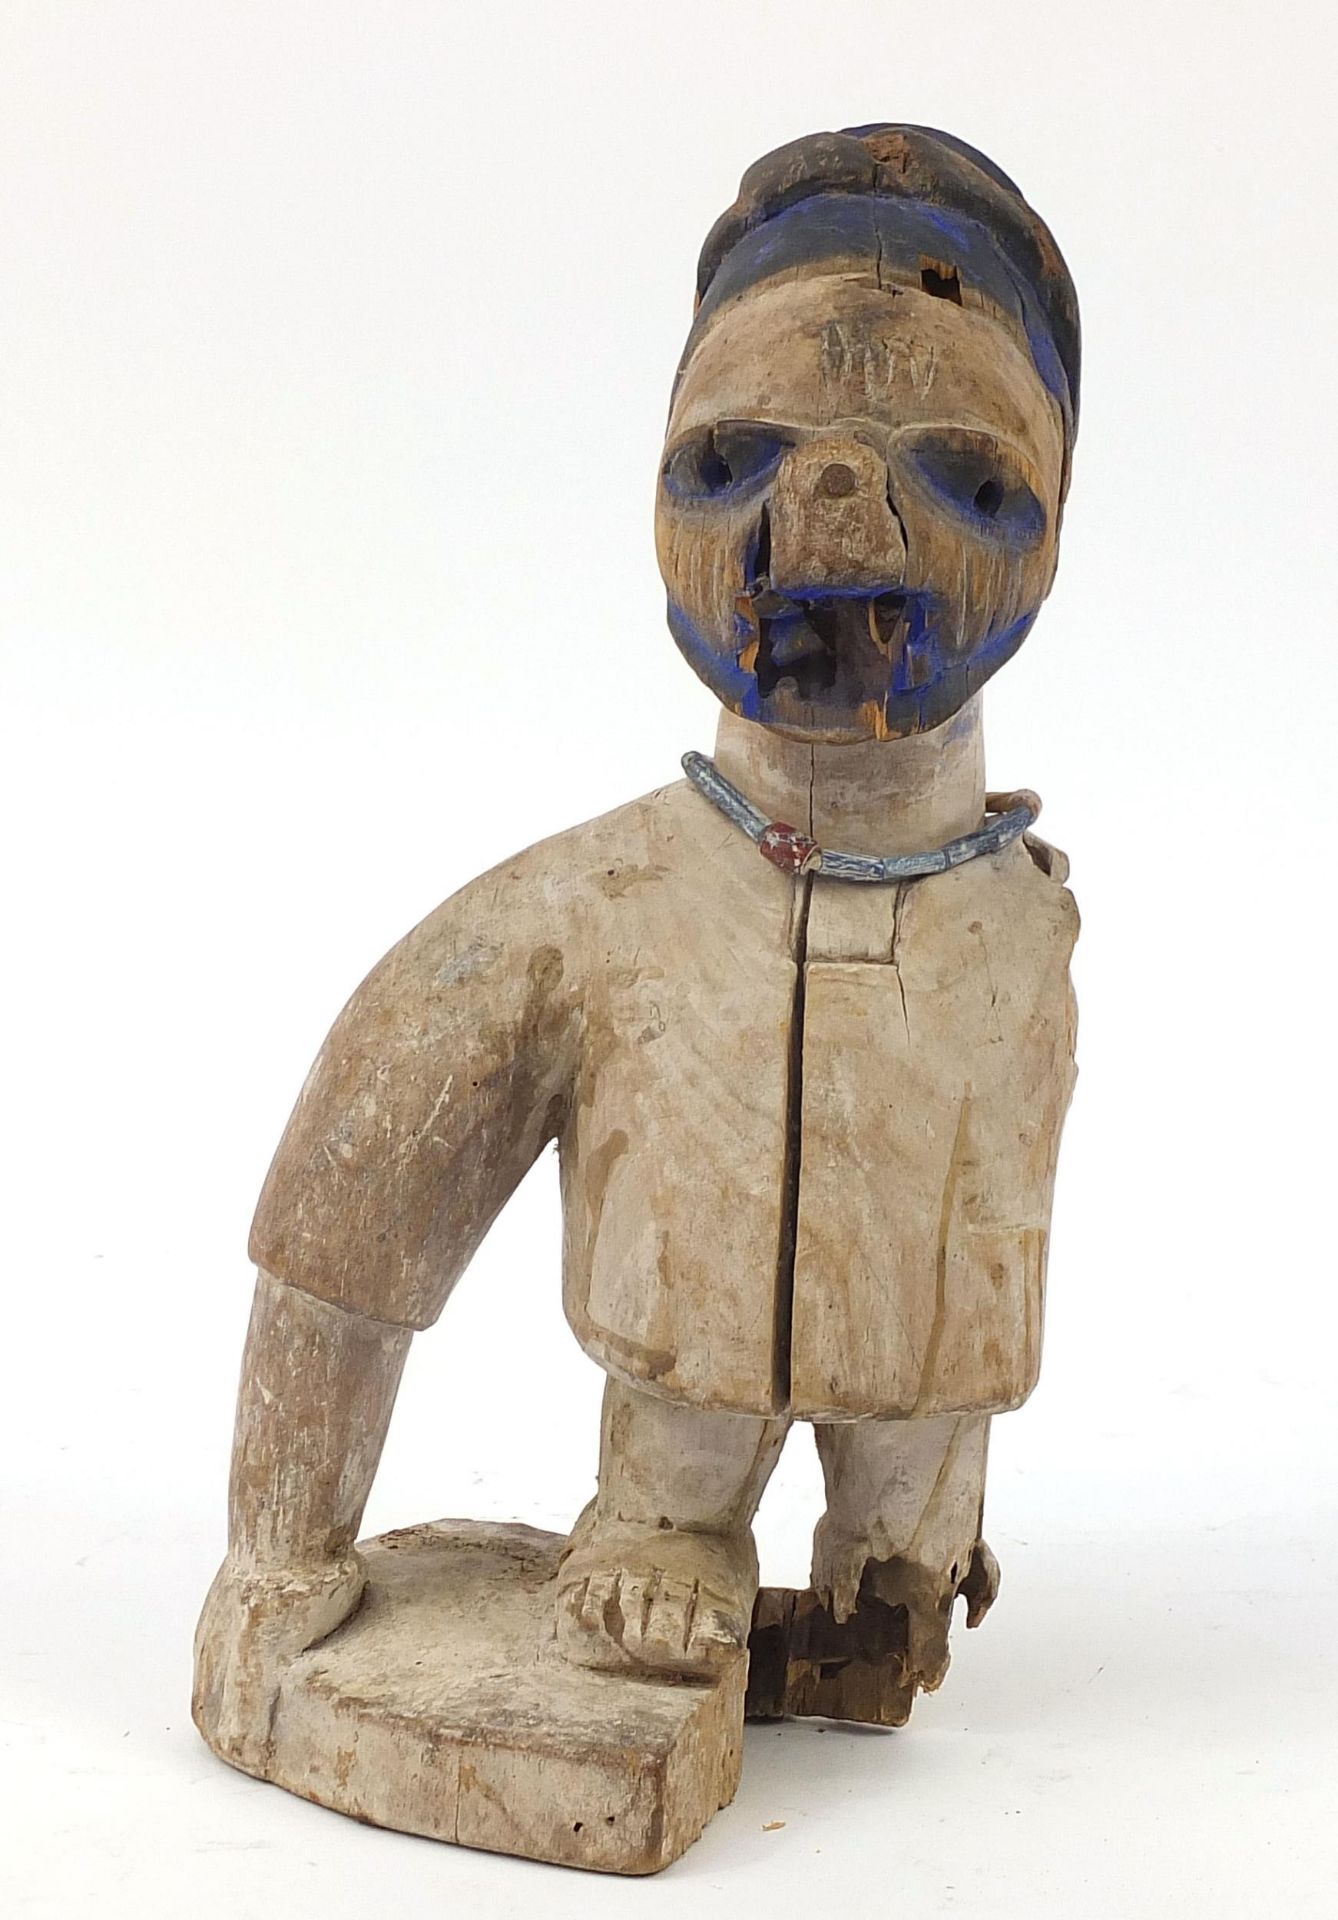 Tribal interest carved wood figure, possibly from New Guinea, 35cm high